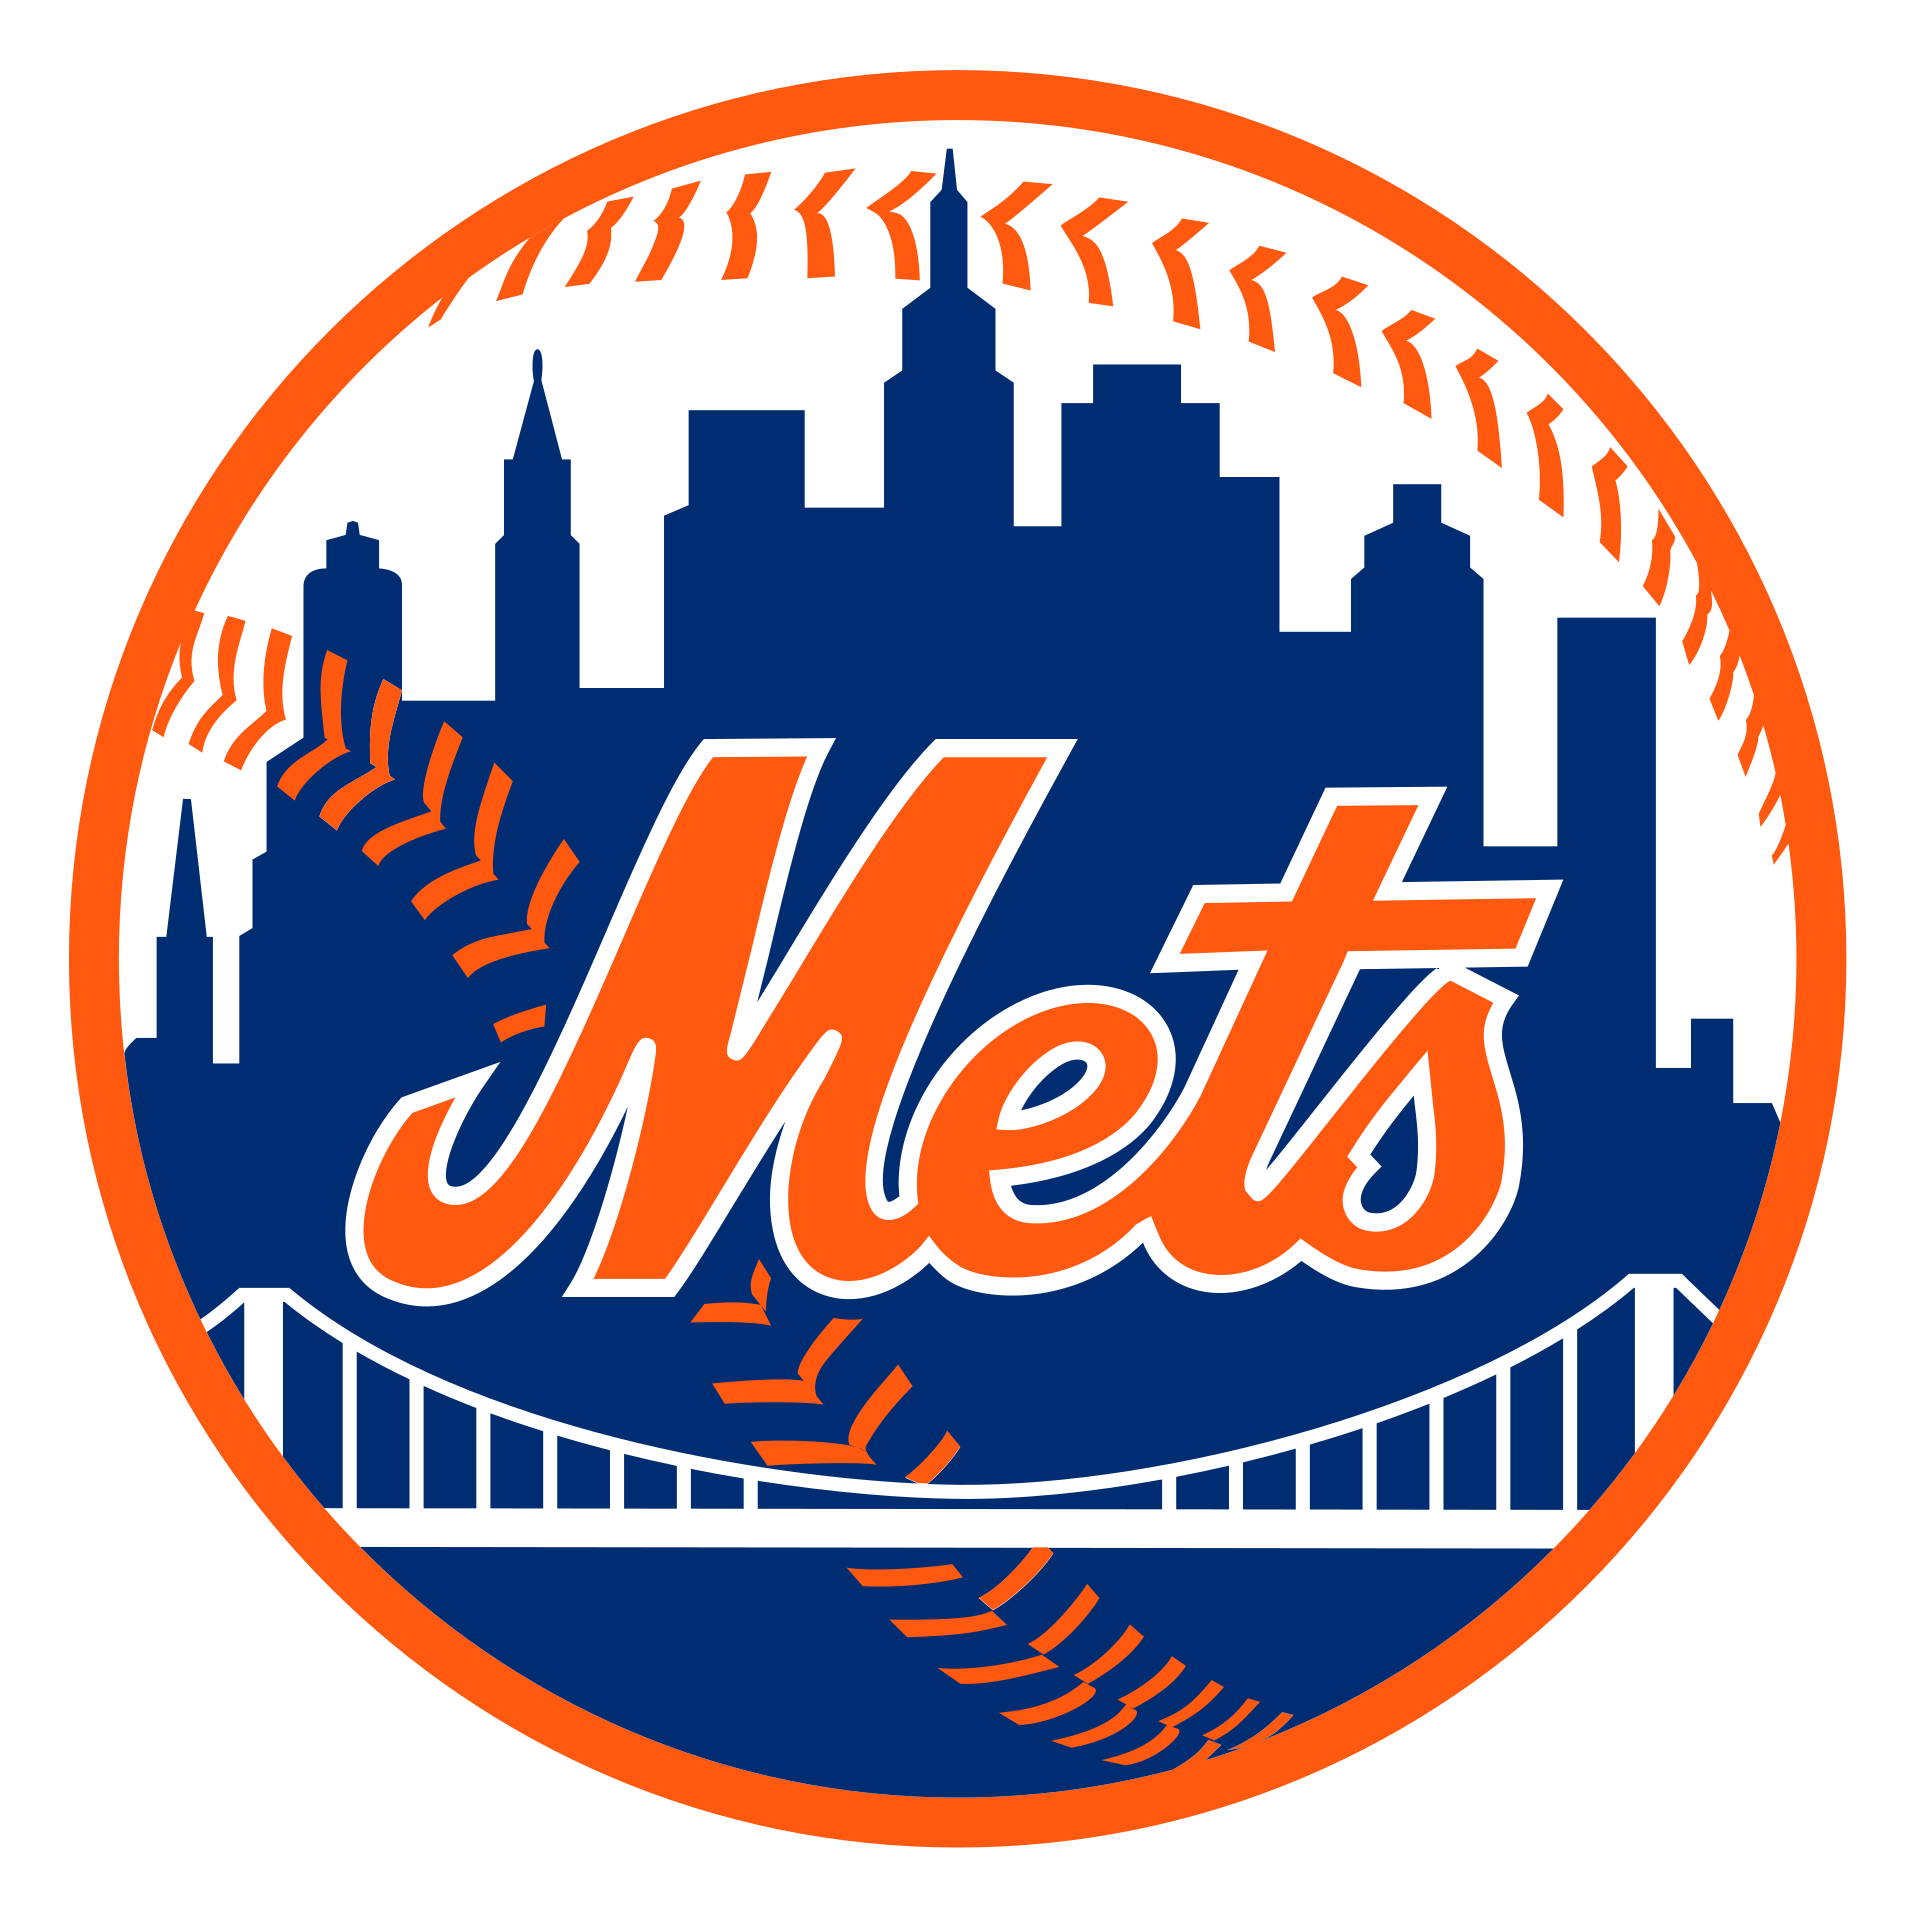 The New York Mets